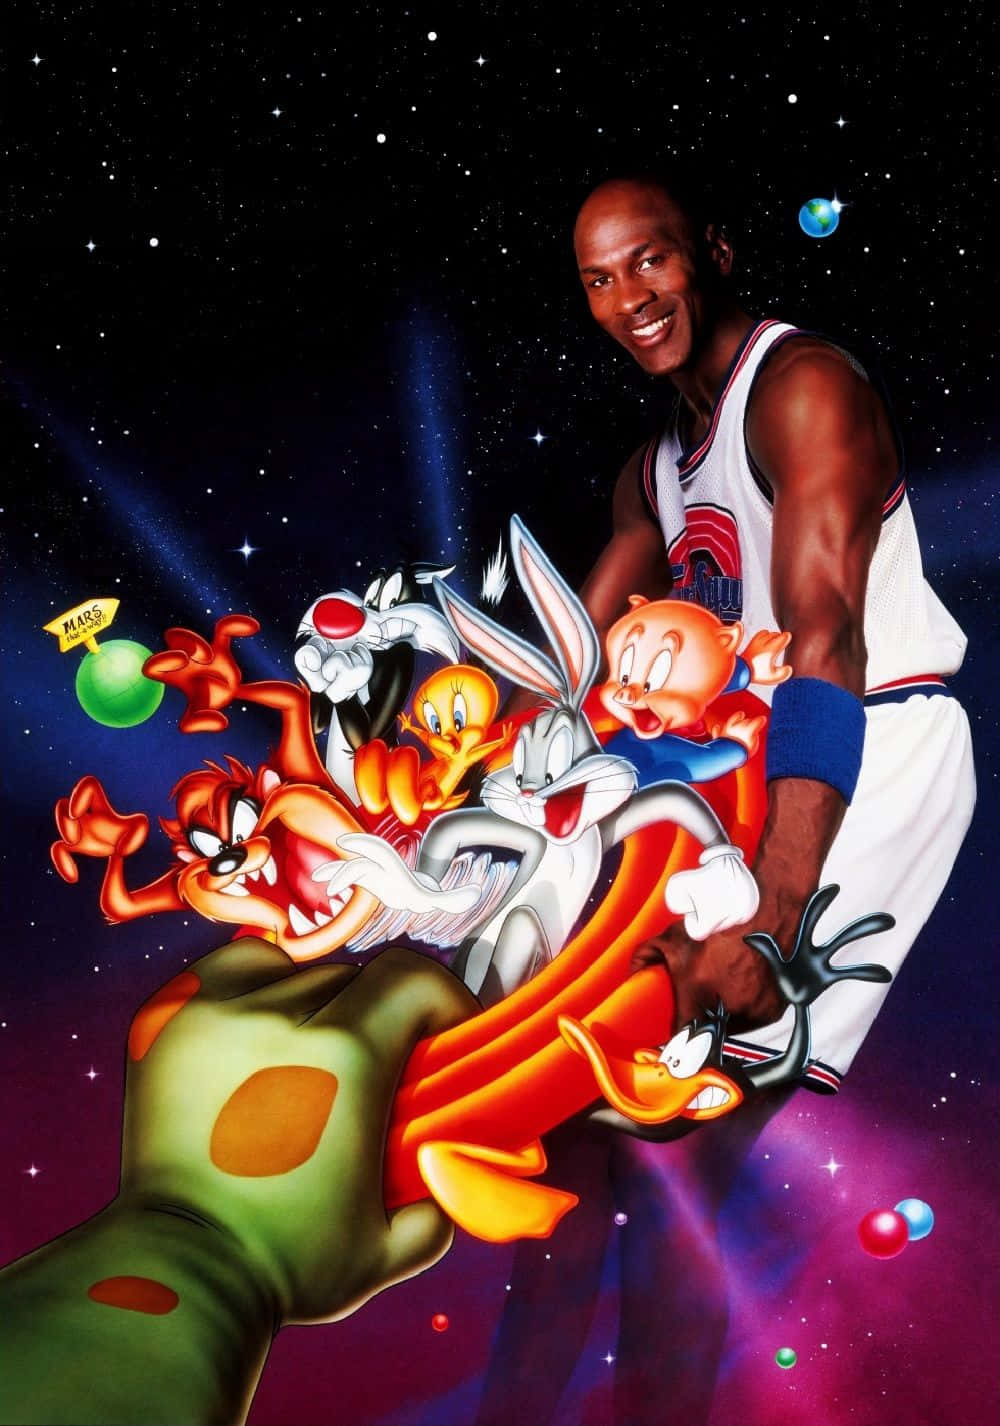 Explore Out of this World Experiences with Cool Space Jam Wallpaper